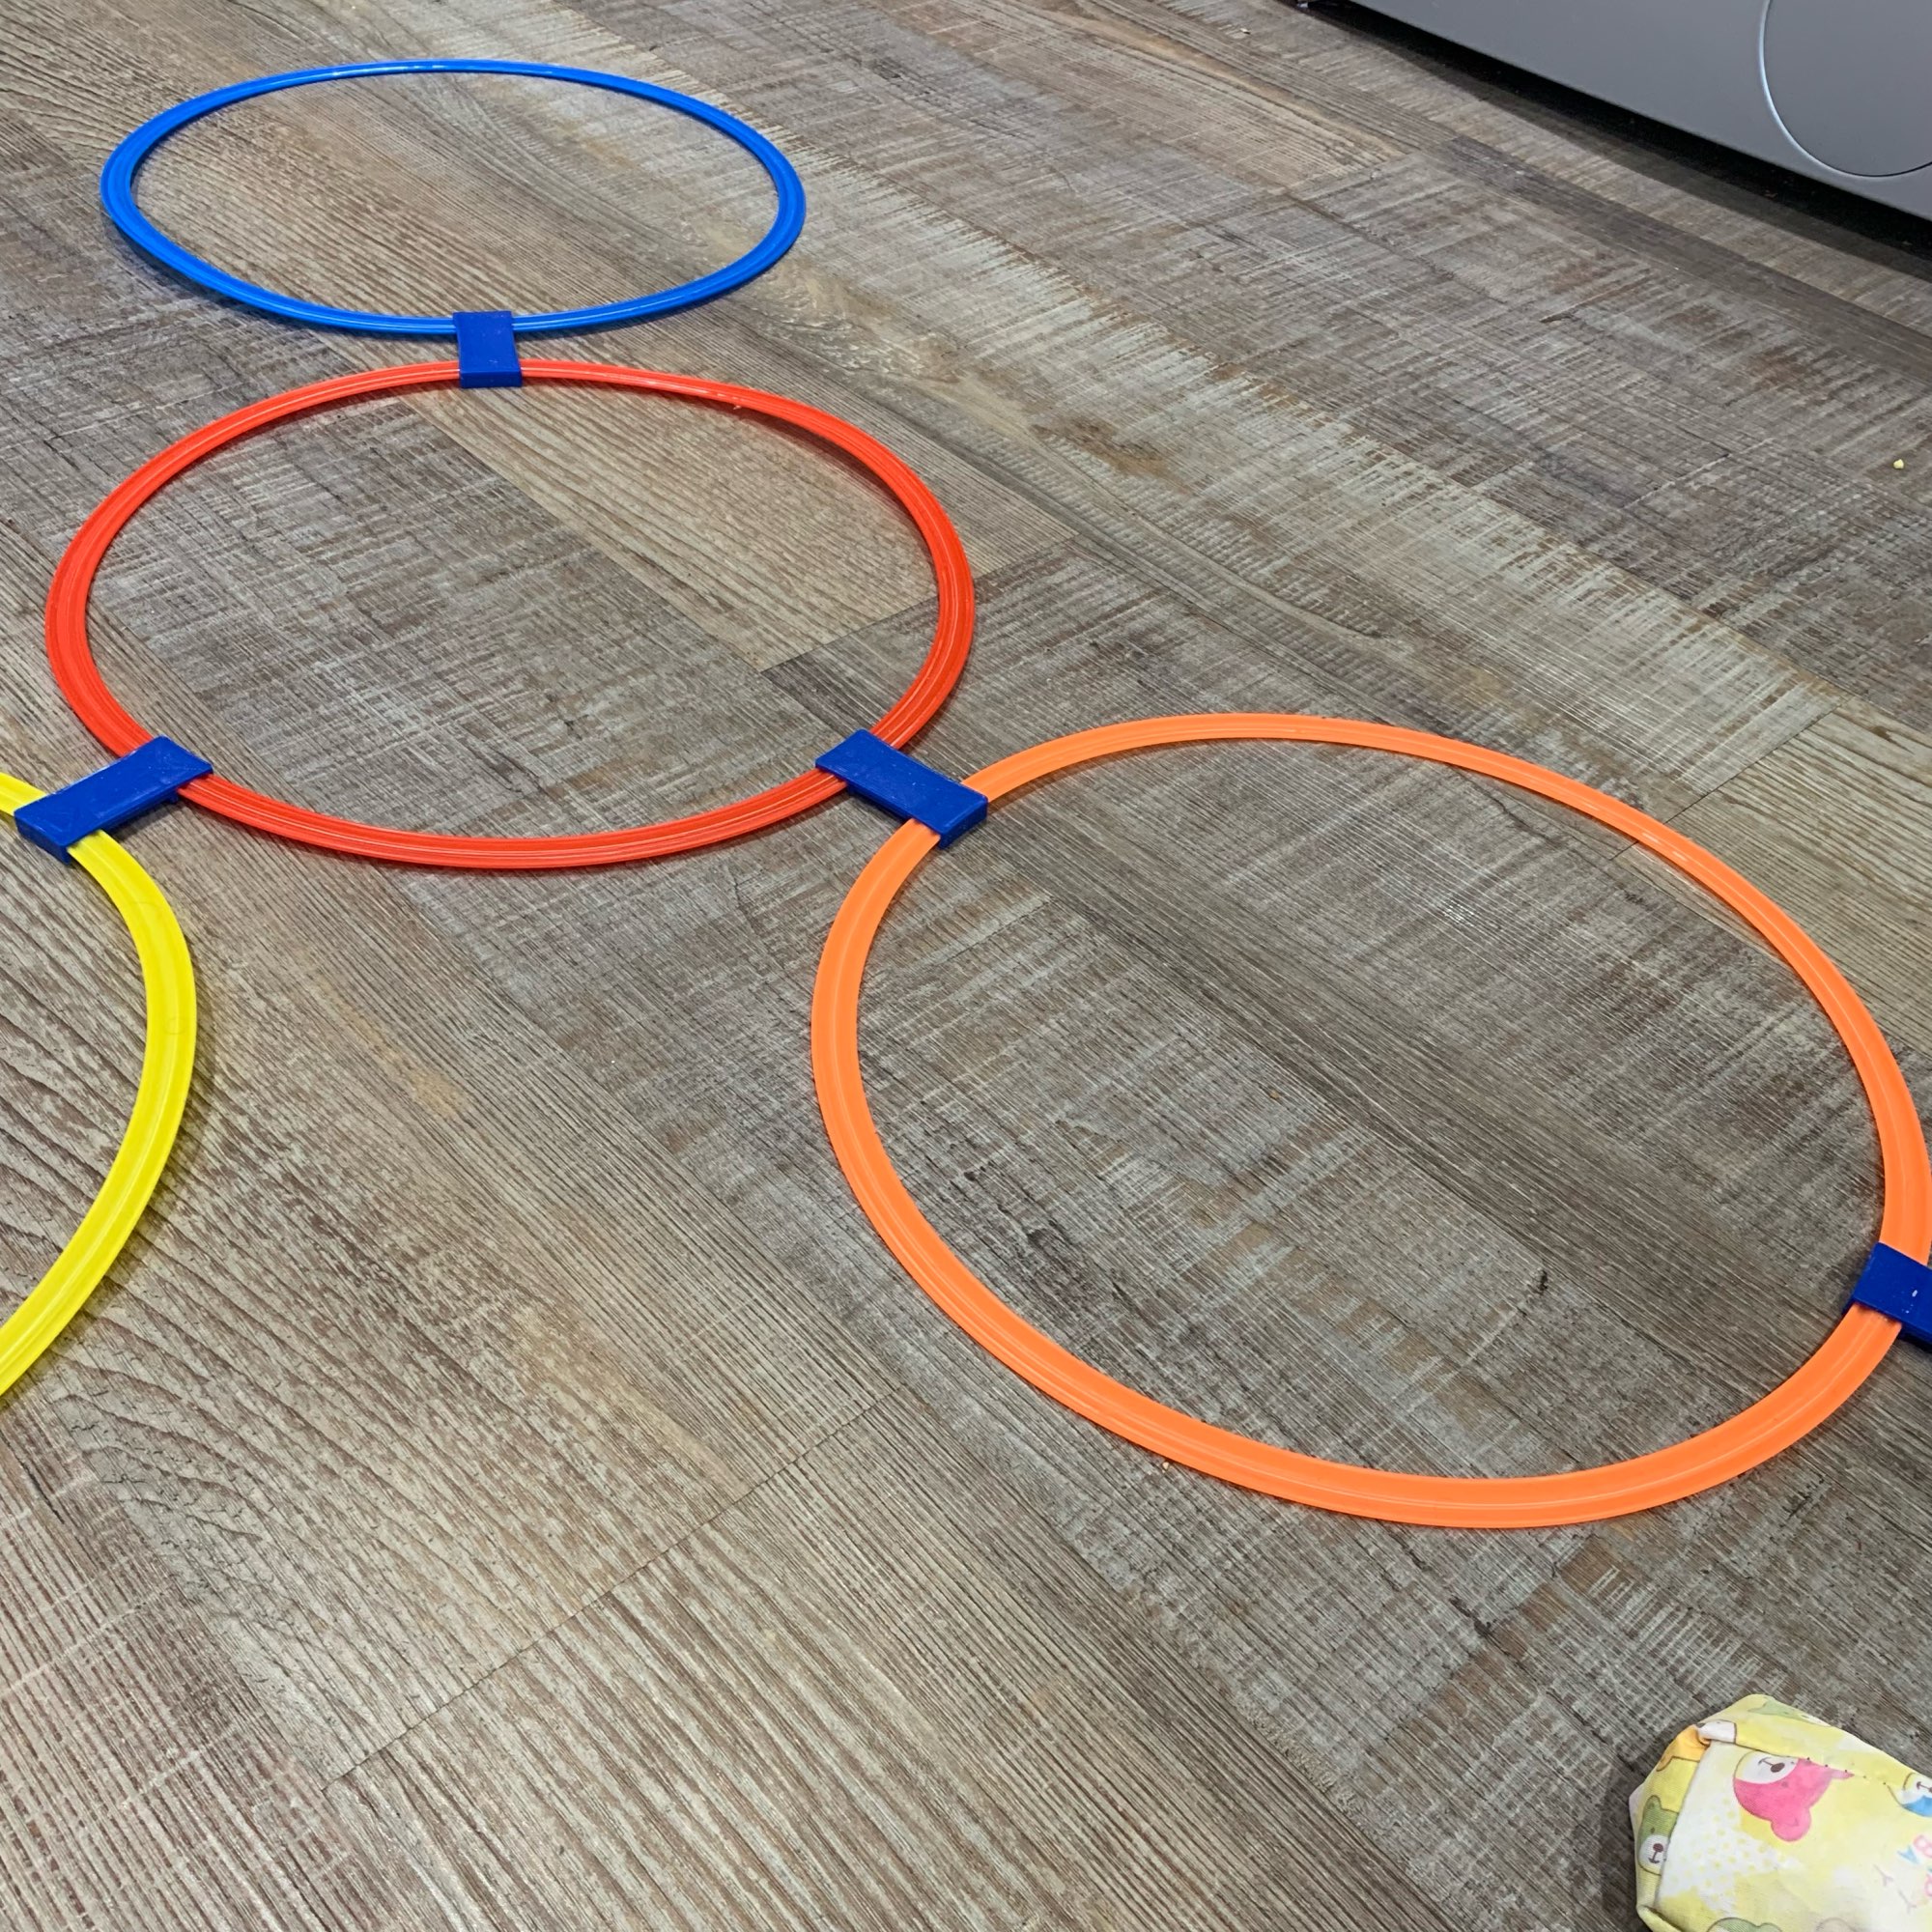 Children's Jumping Lattice Circle Ring Physical Fitness And Agility Training Equipment photo review